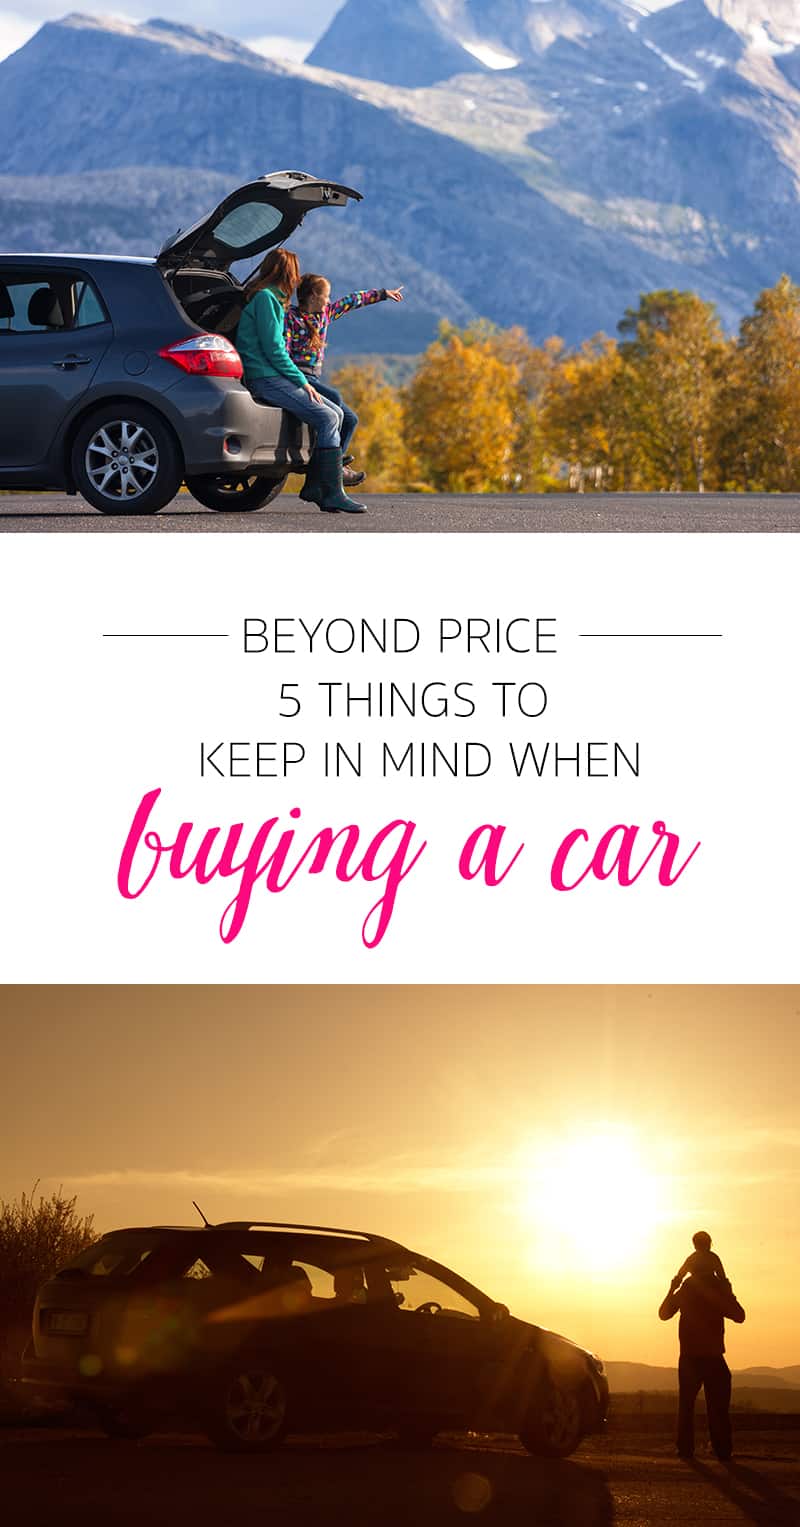 Beyond Price: 5 Things to Keep in Mind When Buying a Car for Your Family *Whether you're buying new or used, this is a great read